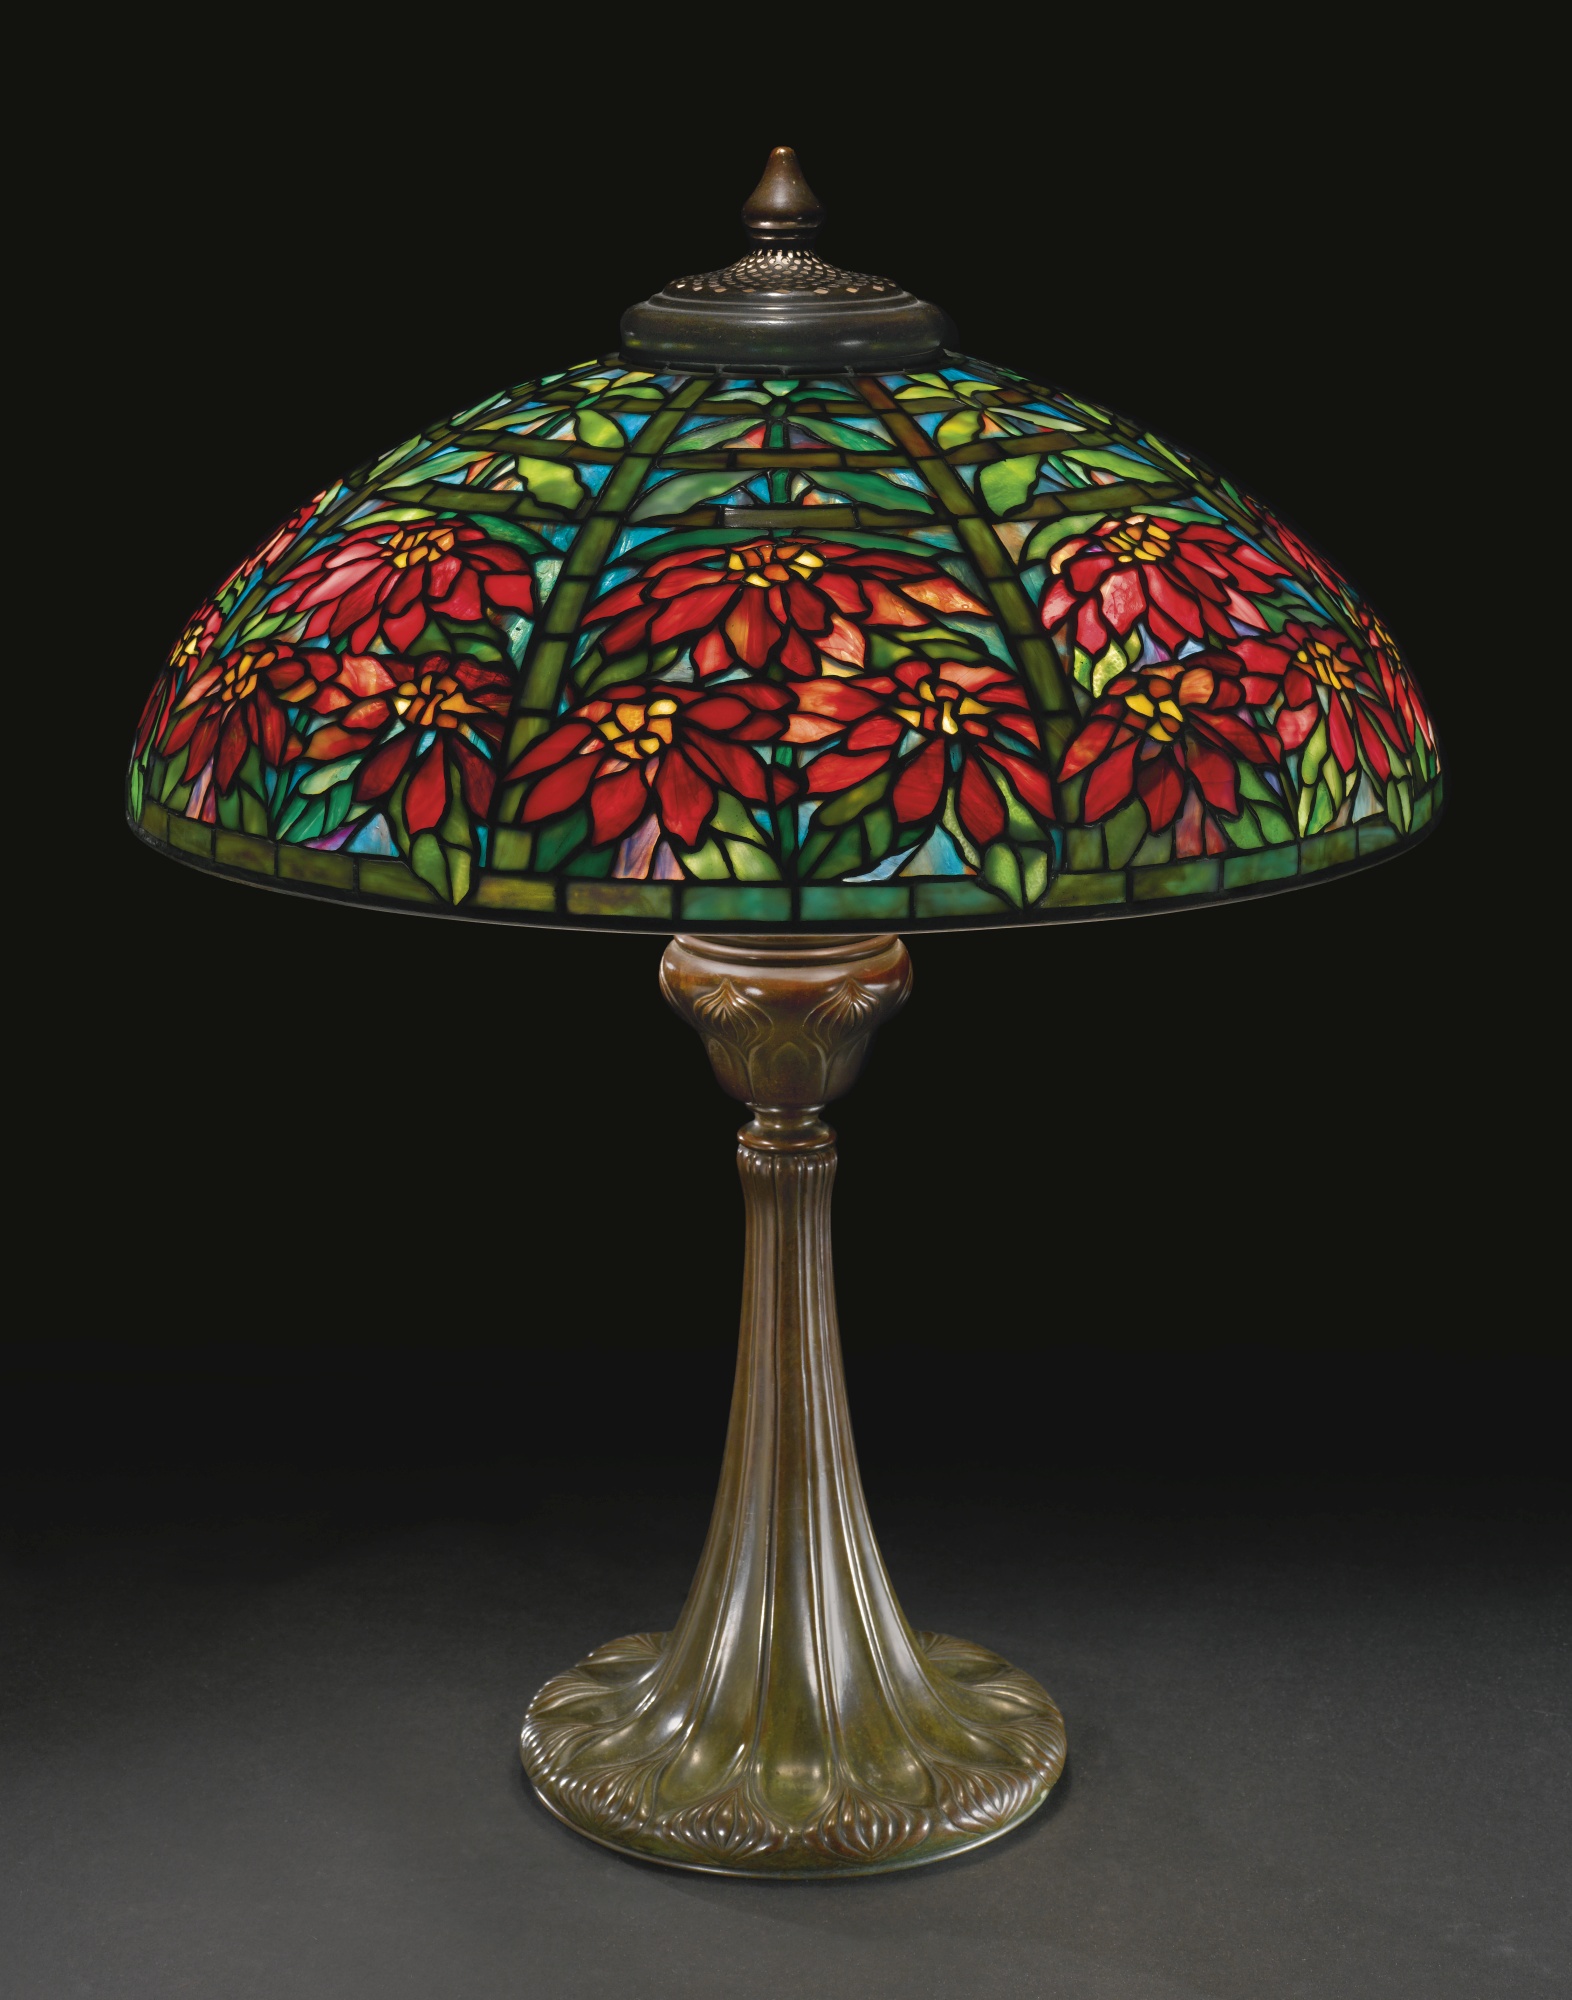 10 facts about Authentic tiffany lamps | Warisan Lighting